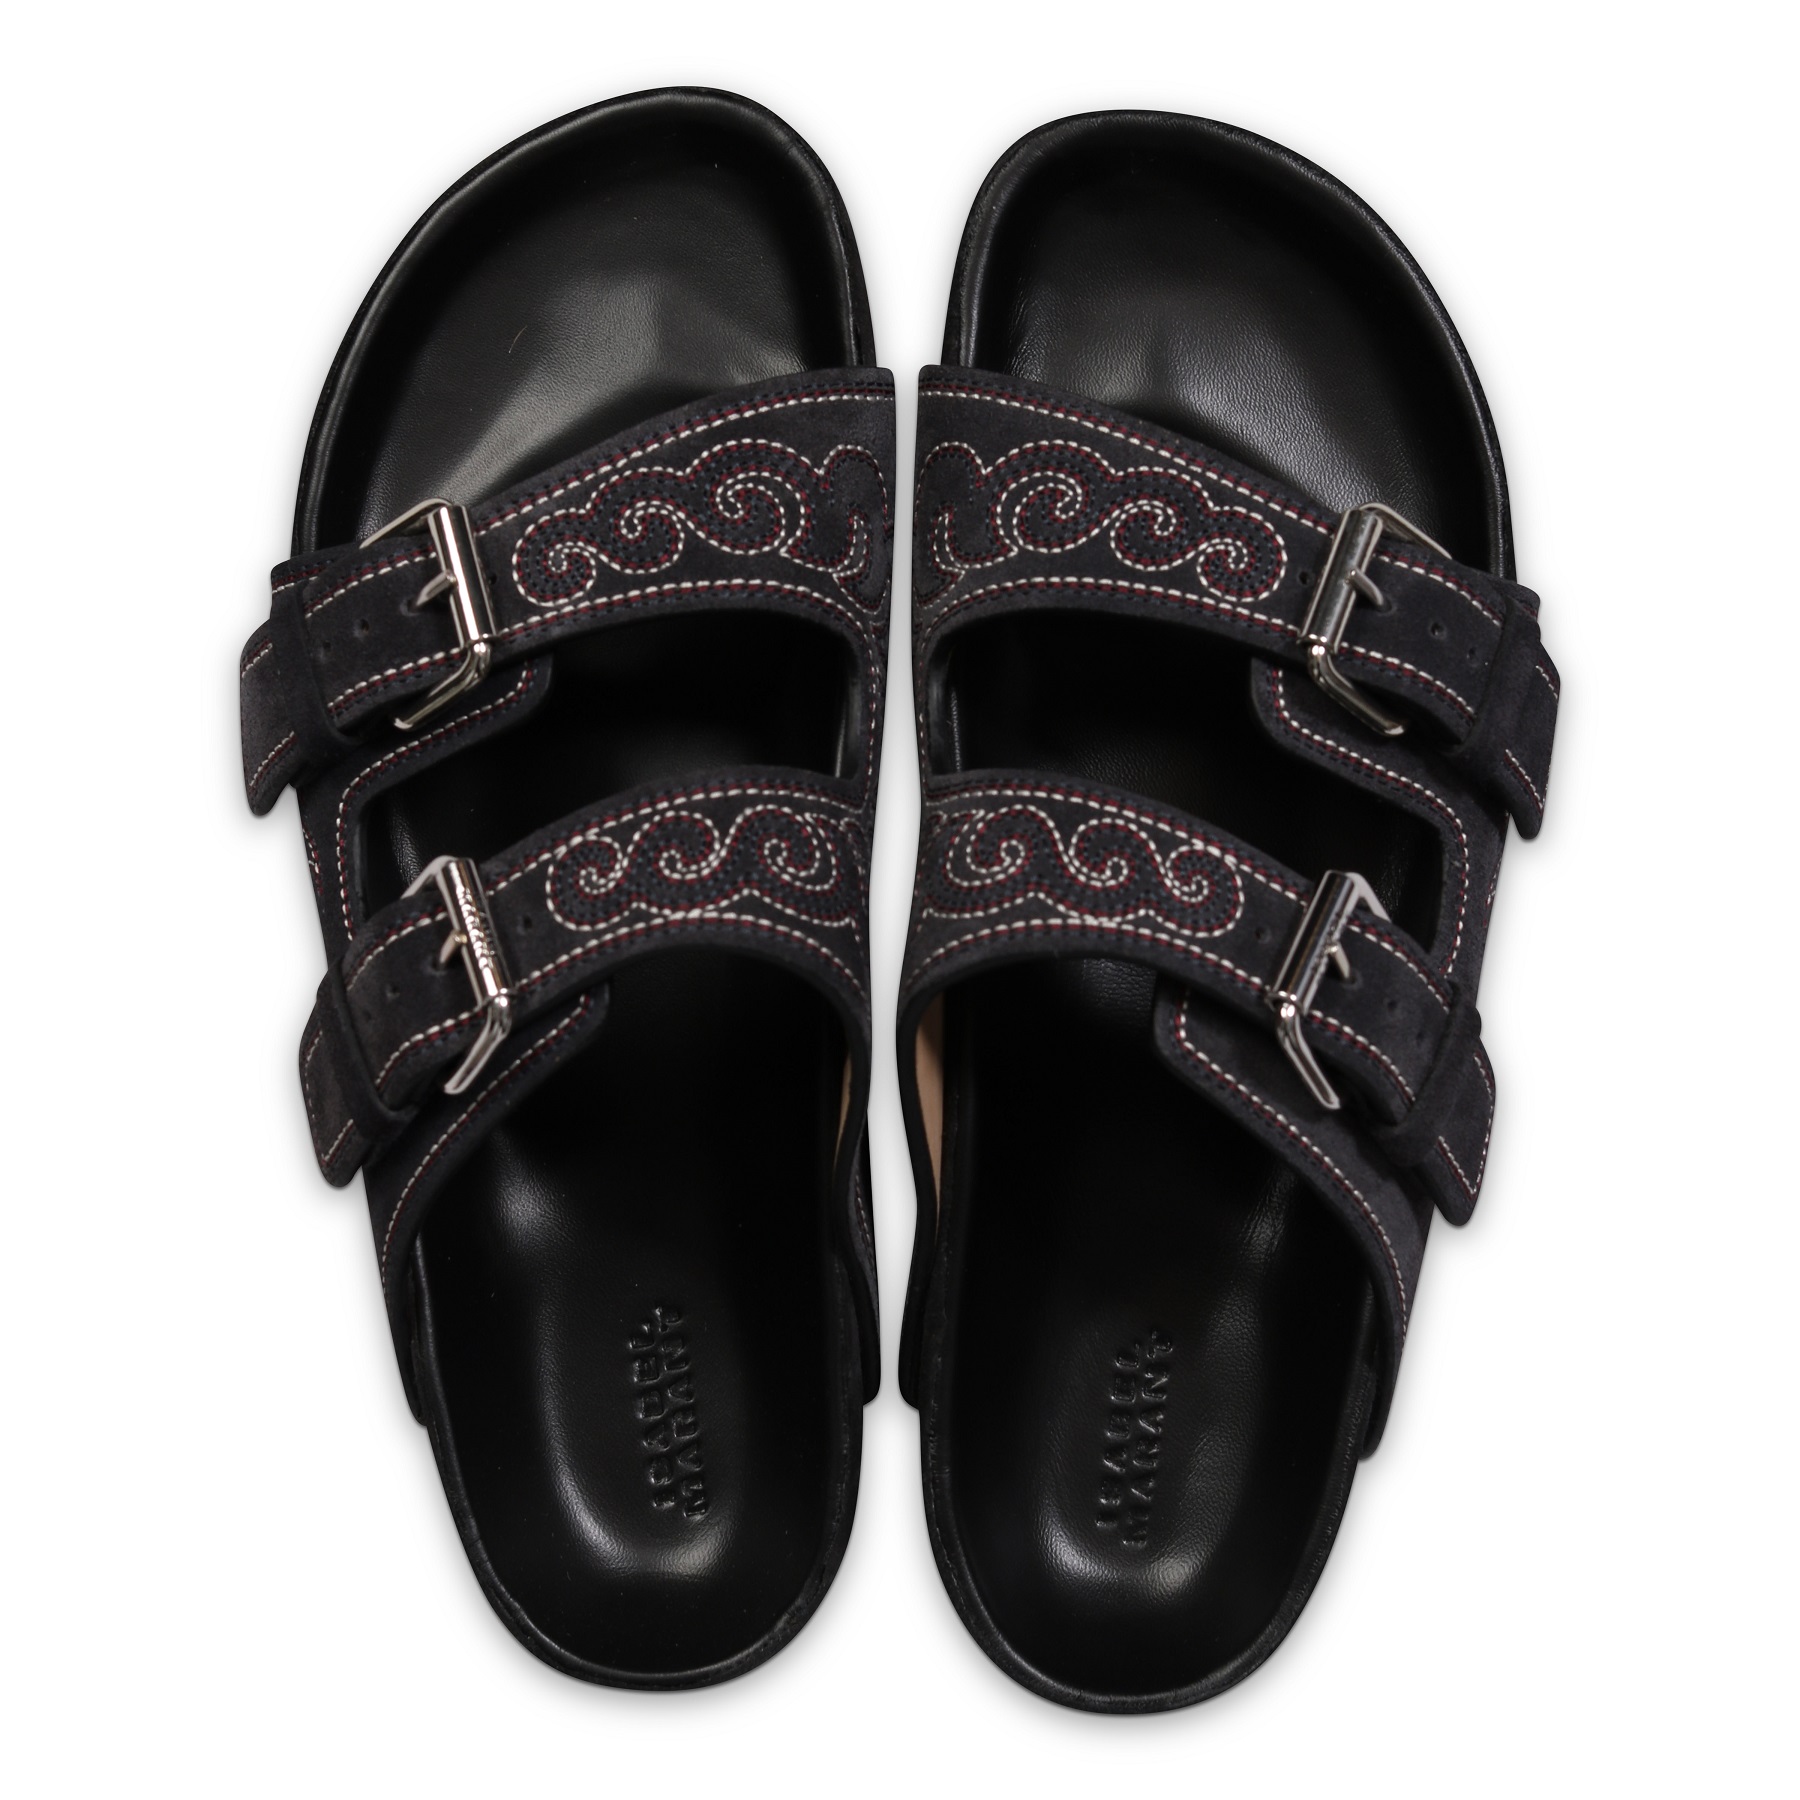 ISABEL MARANT Lennyo Sandals with Stitching in Faded Night 40